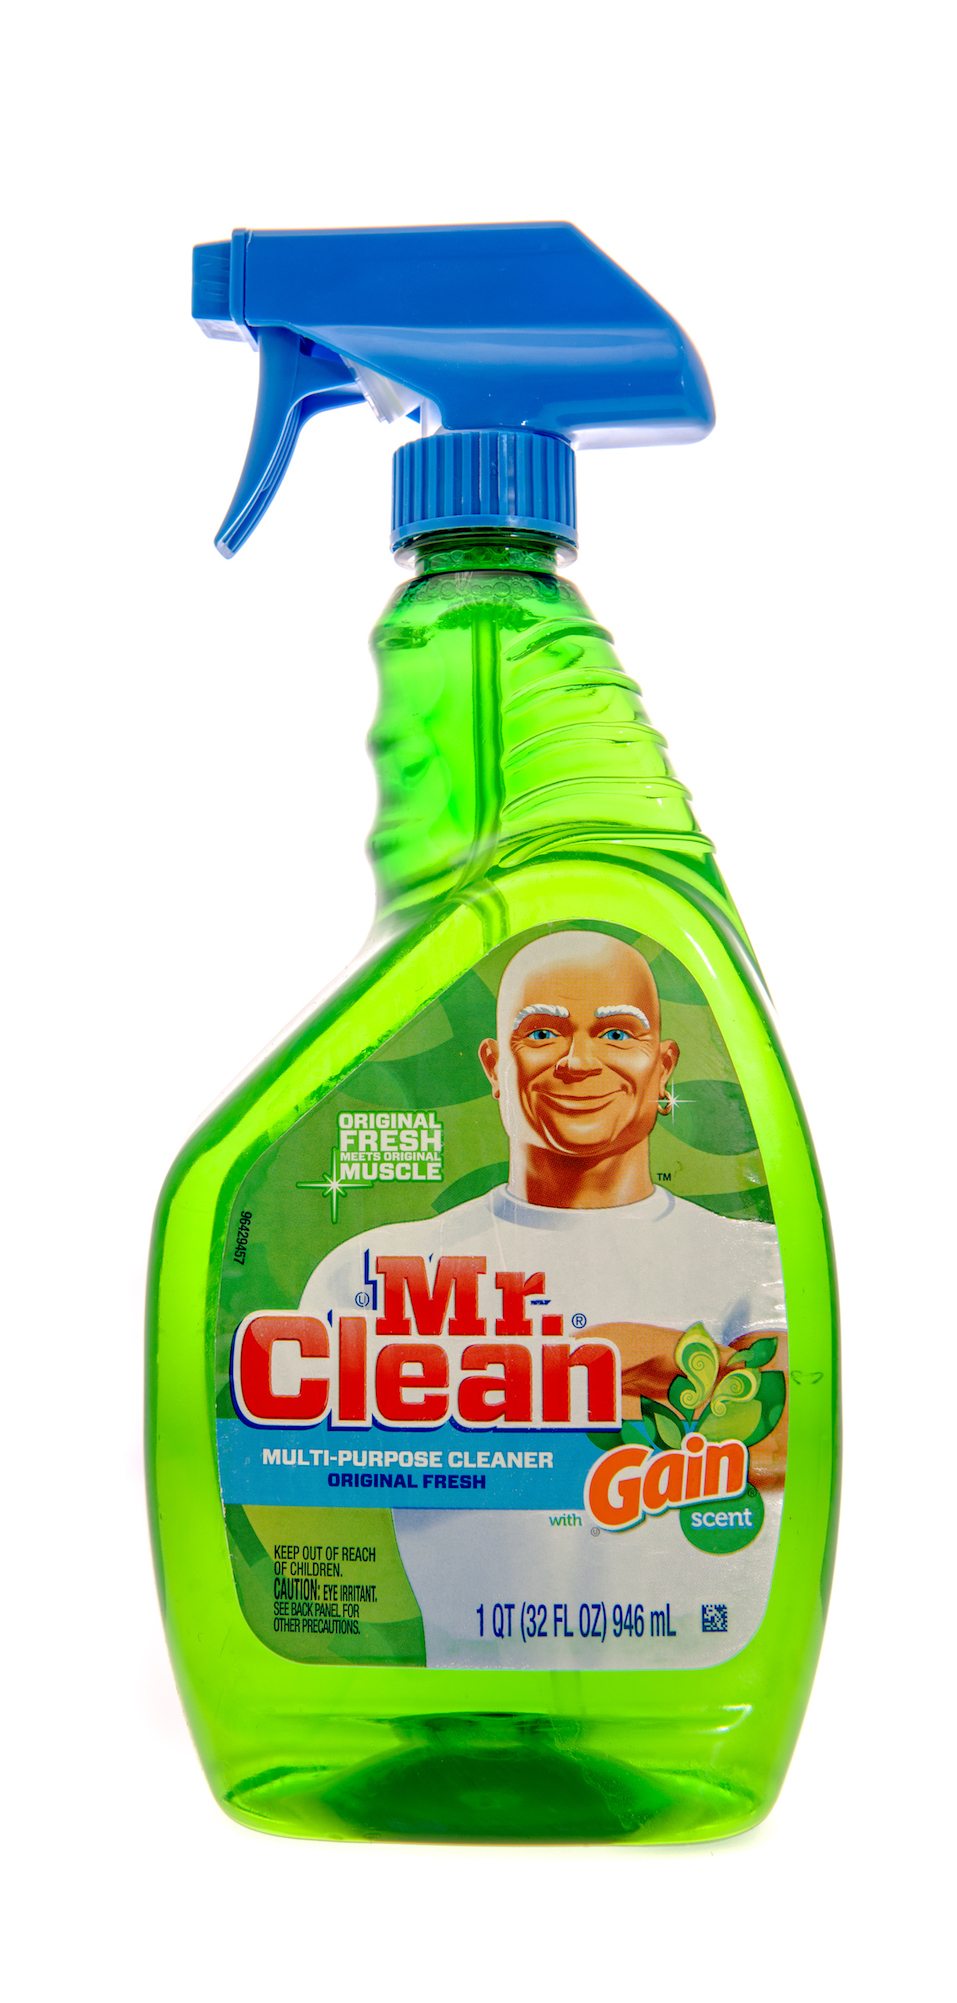 Spray bottle of Mr. Clean all-purpose cleaner